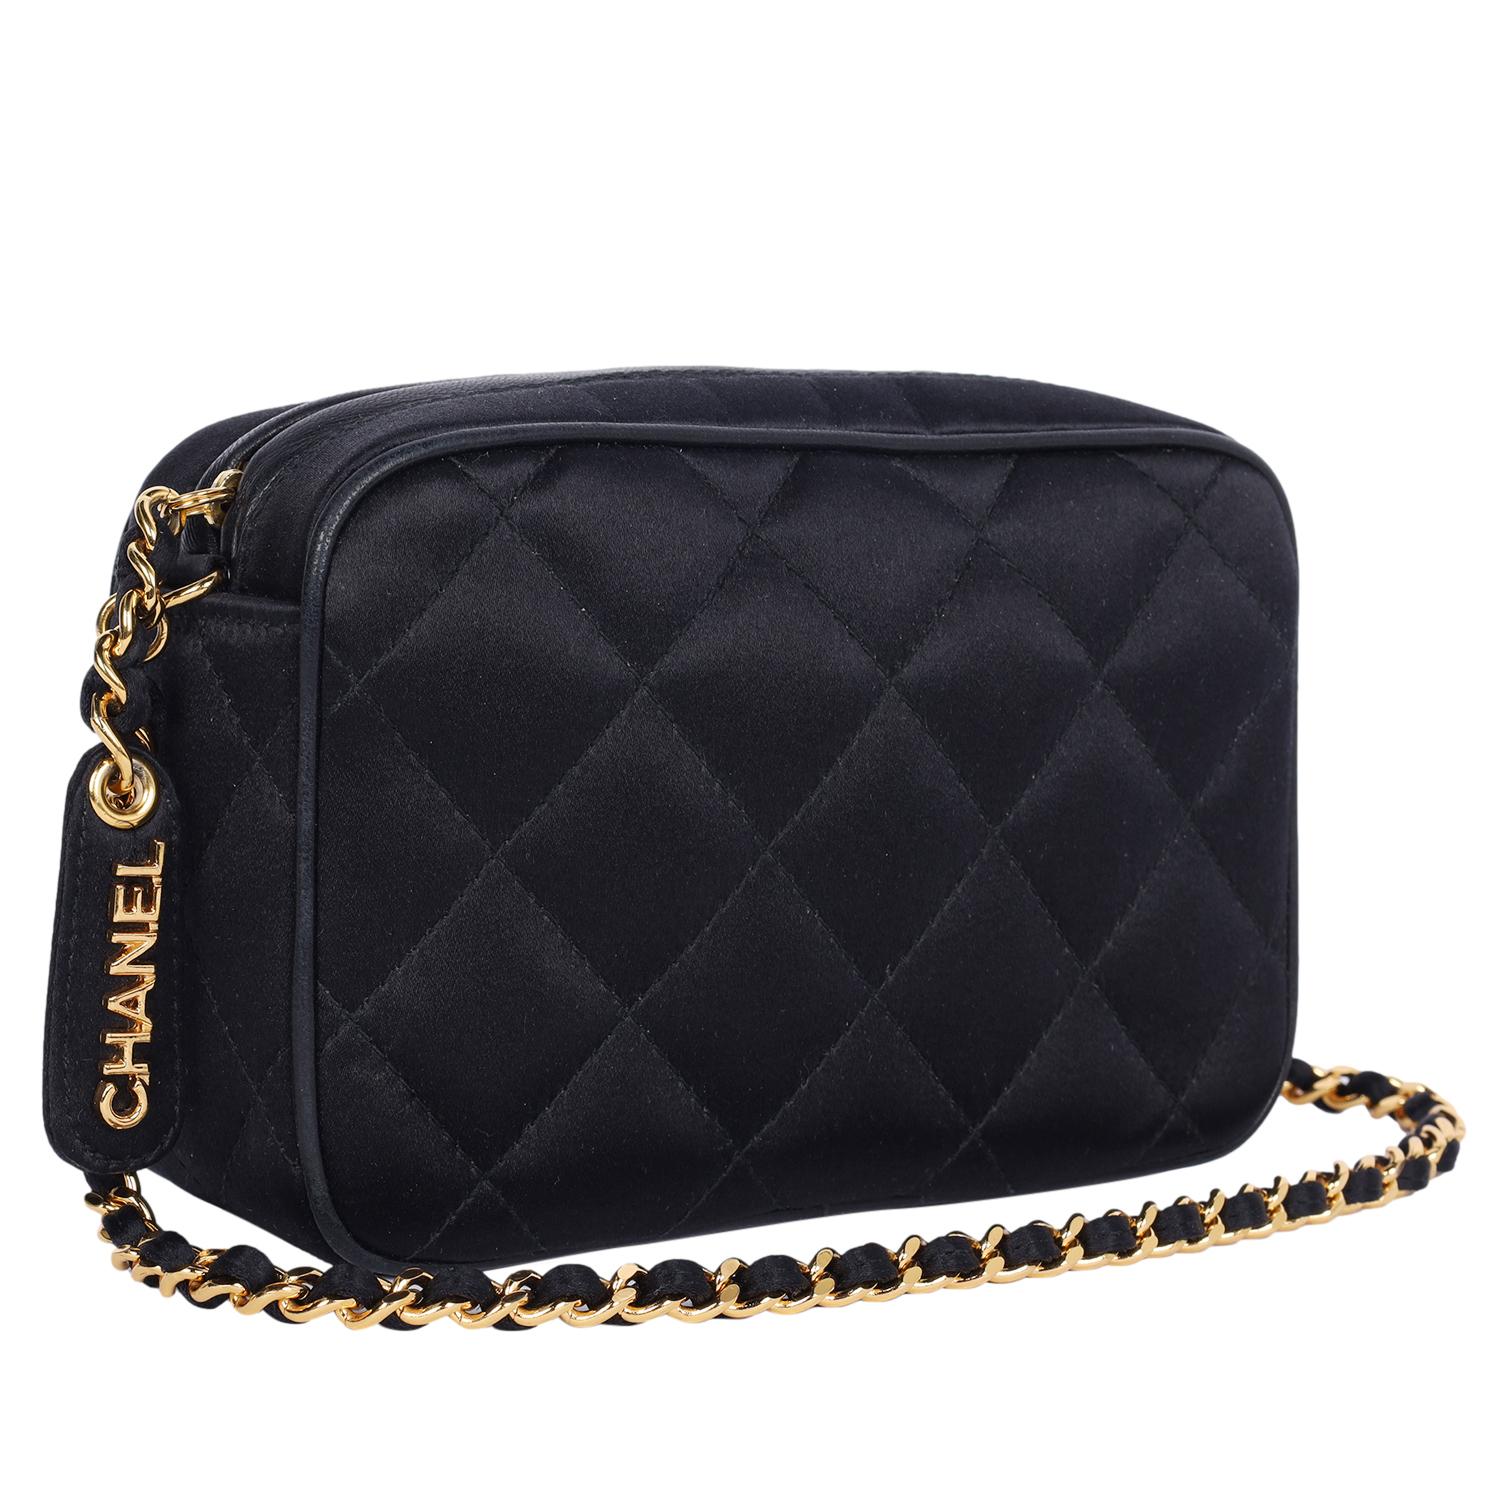 Chanel Mini Satin Leather Quilted Camera Cross Body Bag 1996 For Sale 1